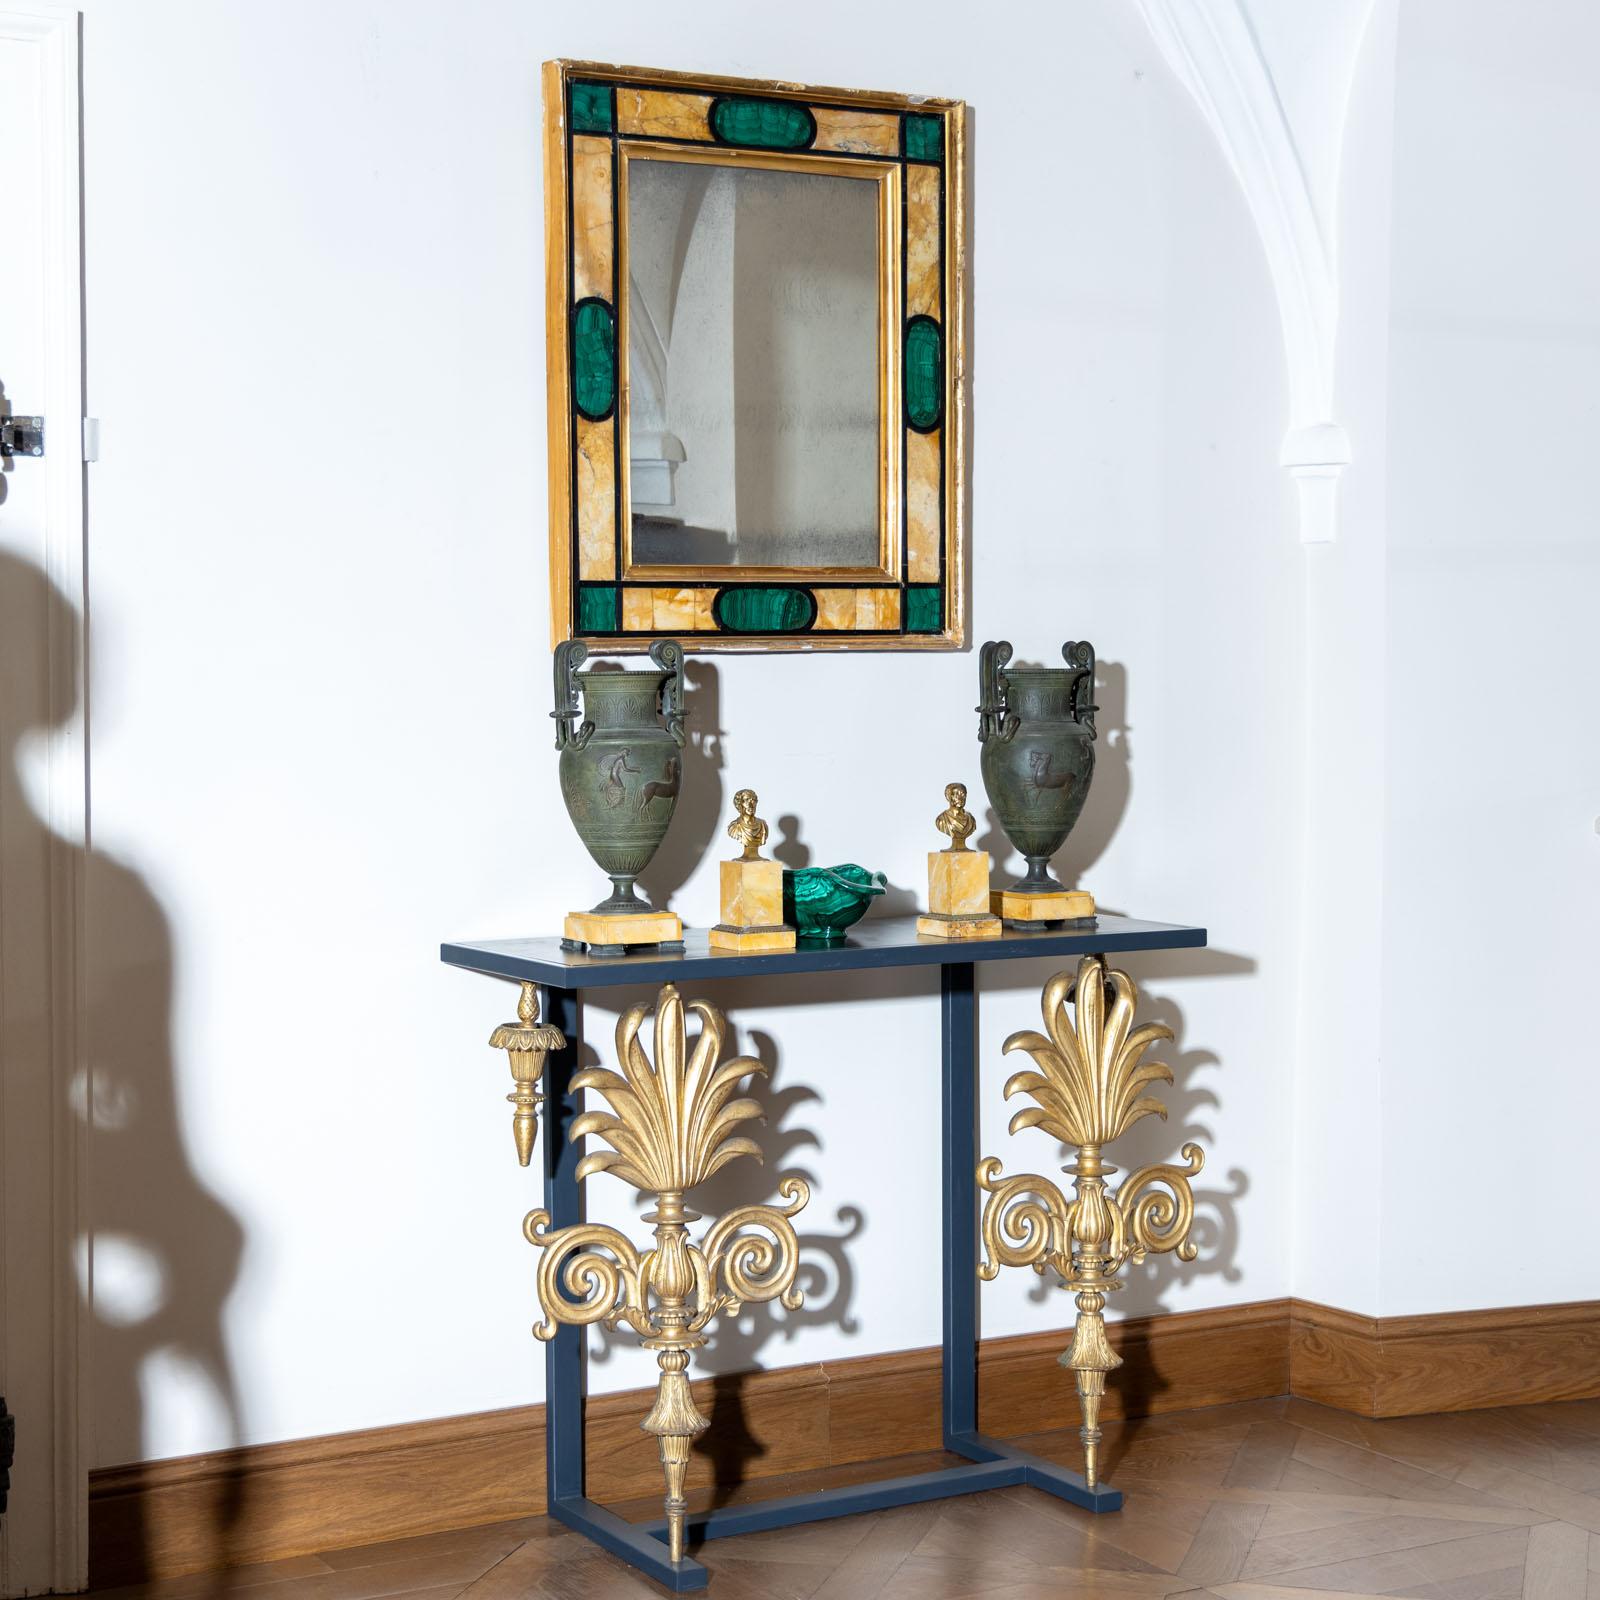 Pair of Wall Mirrors in Giallo Siena and Malachite, Italy 18th Century For Sale 1